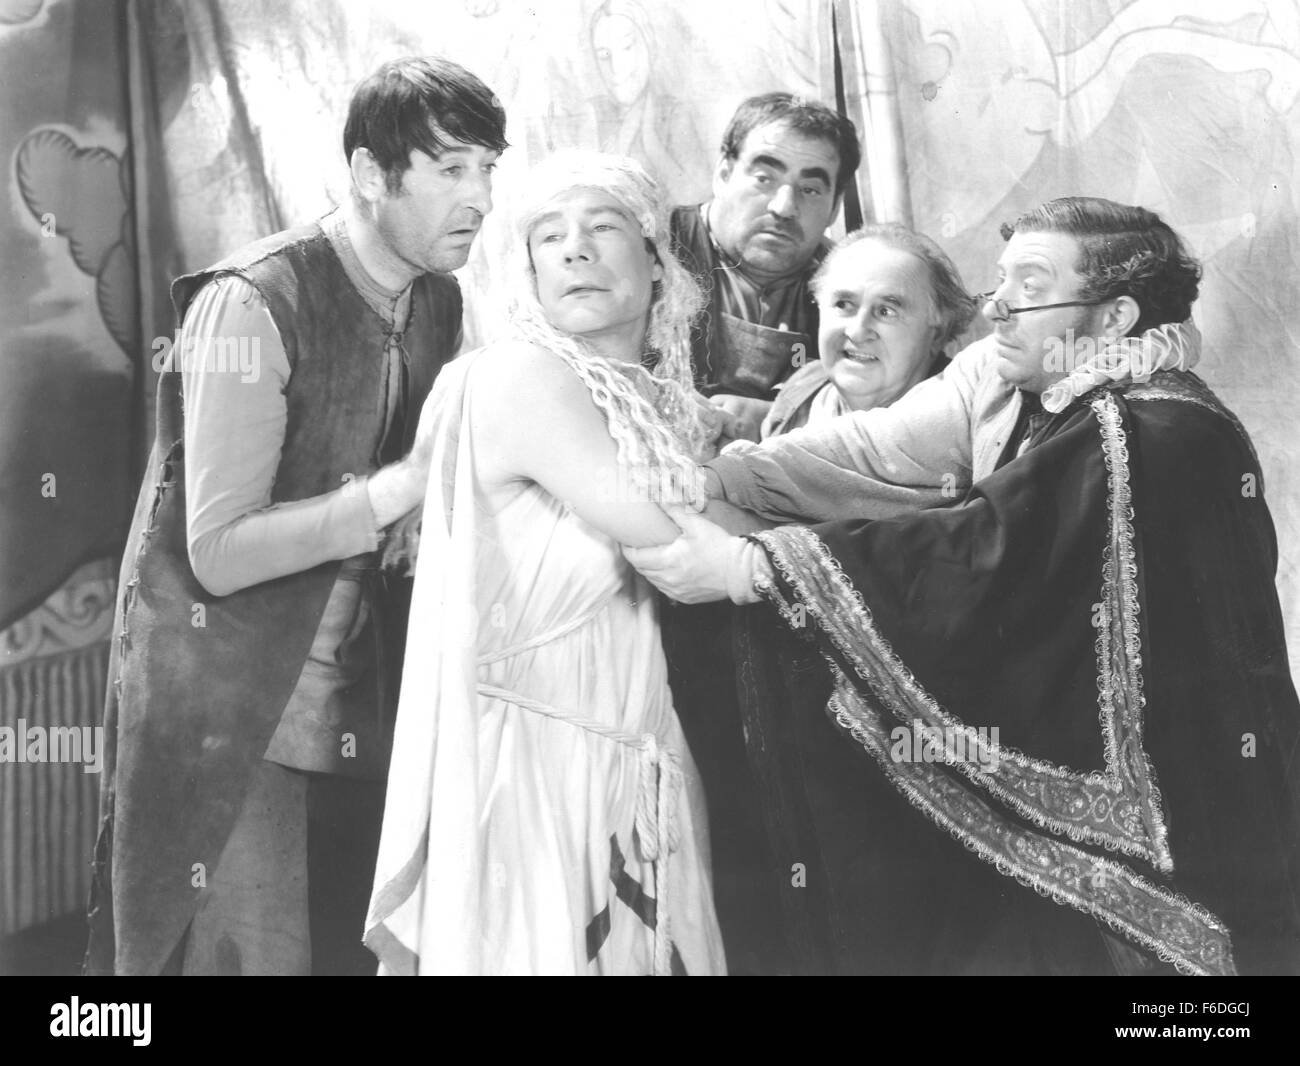 RELEASE DATE: October 30, 1935. MOVIE TITLE: A Midsummer Night's Dream. STUDIO: Warner Bros. Pictures. PLOT: Theseus, Duke of Athens, is going to marry Hyppolyta, Queen of the Amazons. Demetrius is engaged with Hermia, but Hermia loves Lysander. Helena loves Demetrius. Oberon and Titania, of the kingdom of fairies have a slight quarrel about whether or not the boy Titania is raising will join Titania's band or Oberon's, so Oberon tries to get him from her by using some magic. But they're not alone in that forest.Lysander and Hermina have there a rendezvous, Helena and Demetrius are there, too Stock Photo